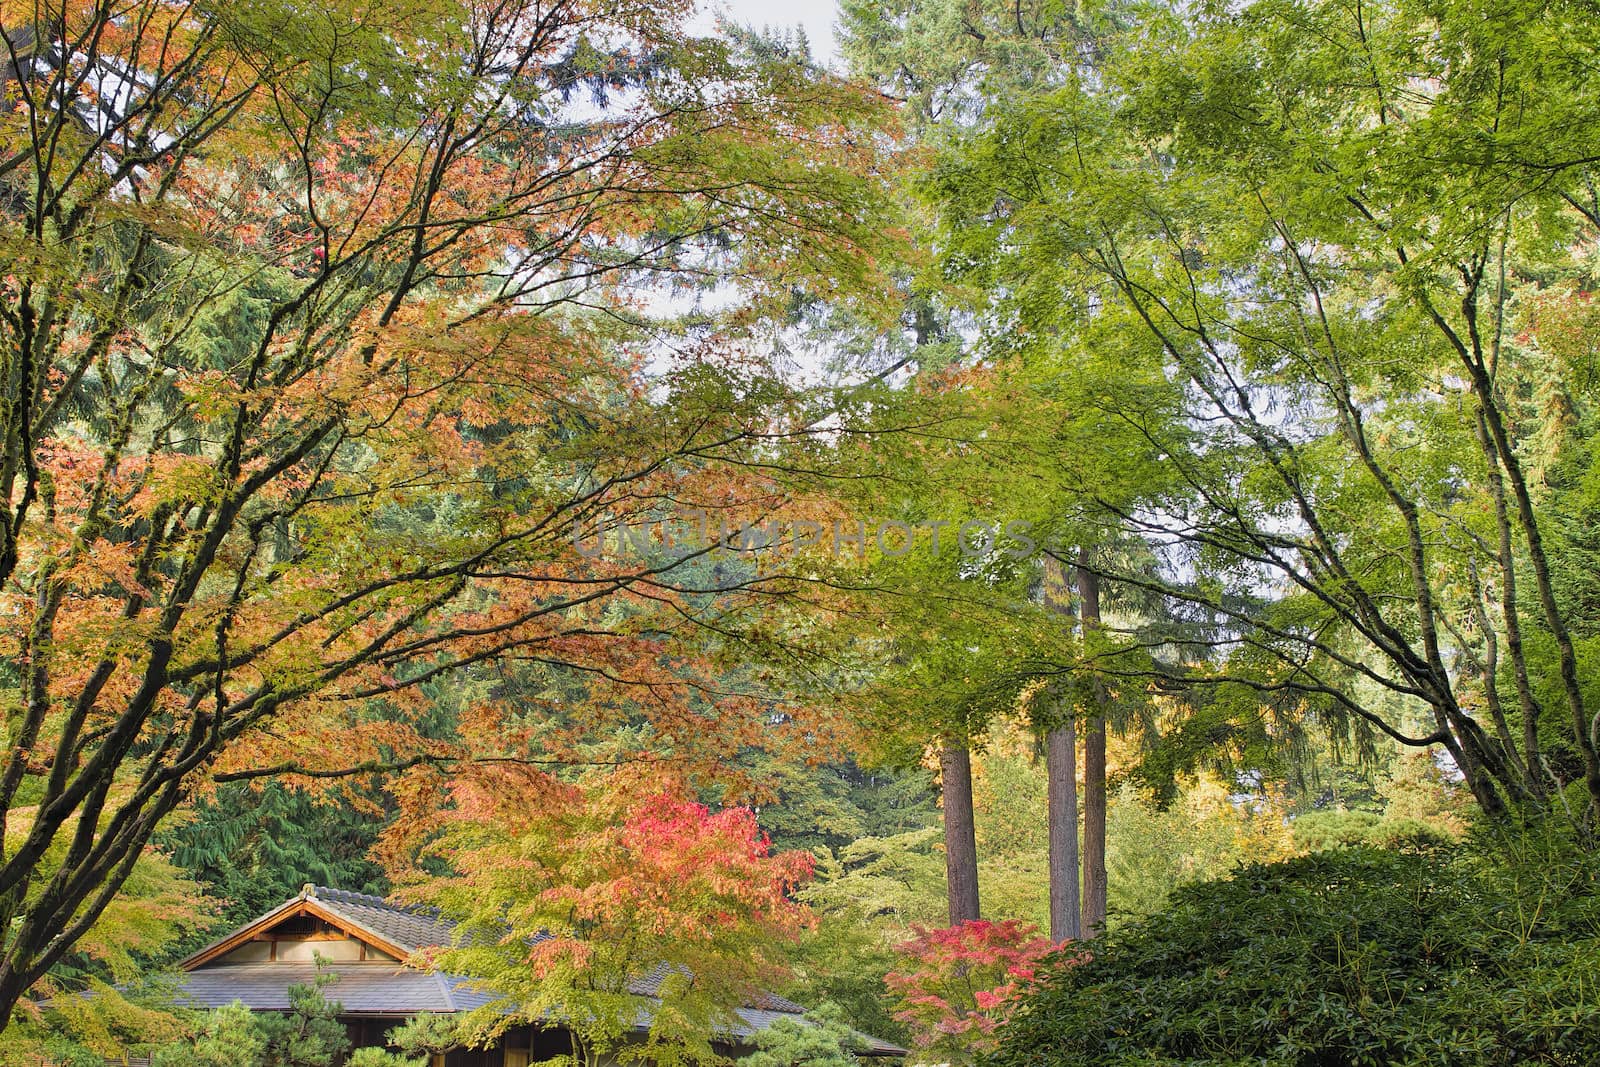 Tall Upright Japanese Maple Tree Foliage Changing Color in Fall Season